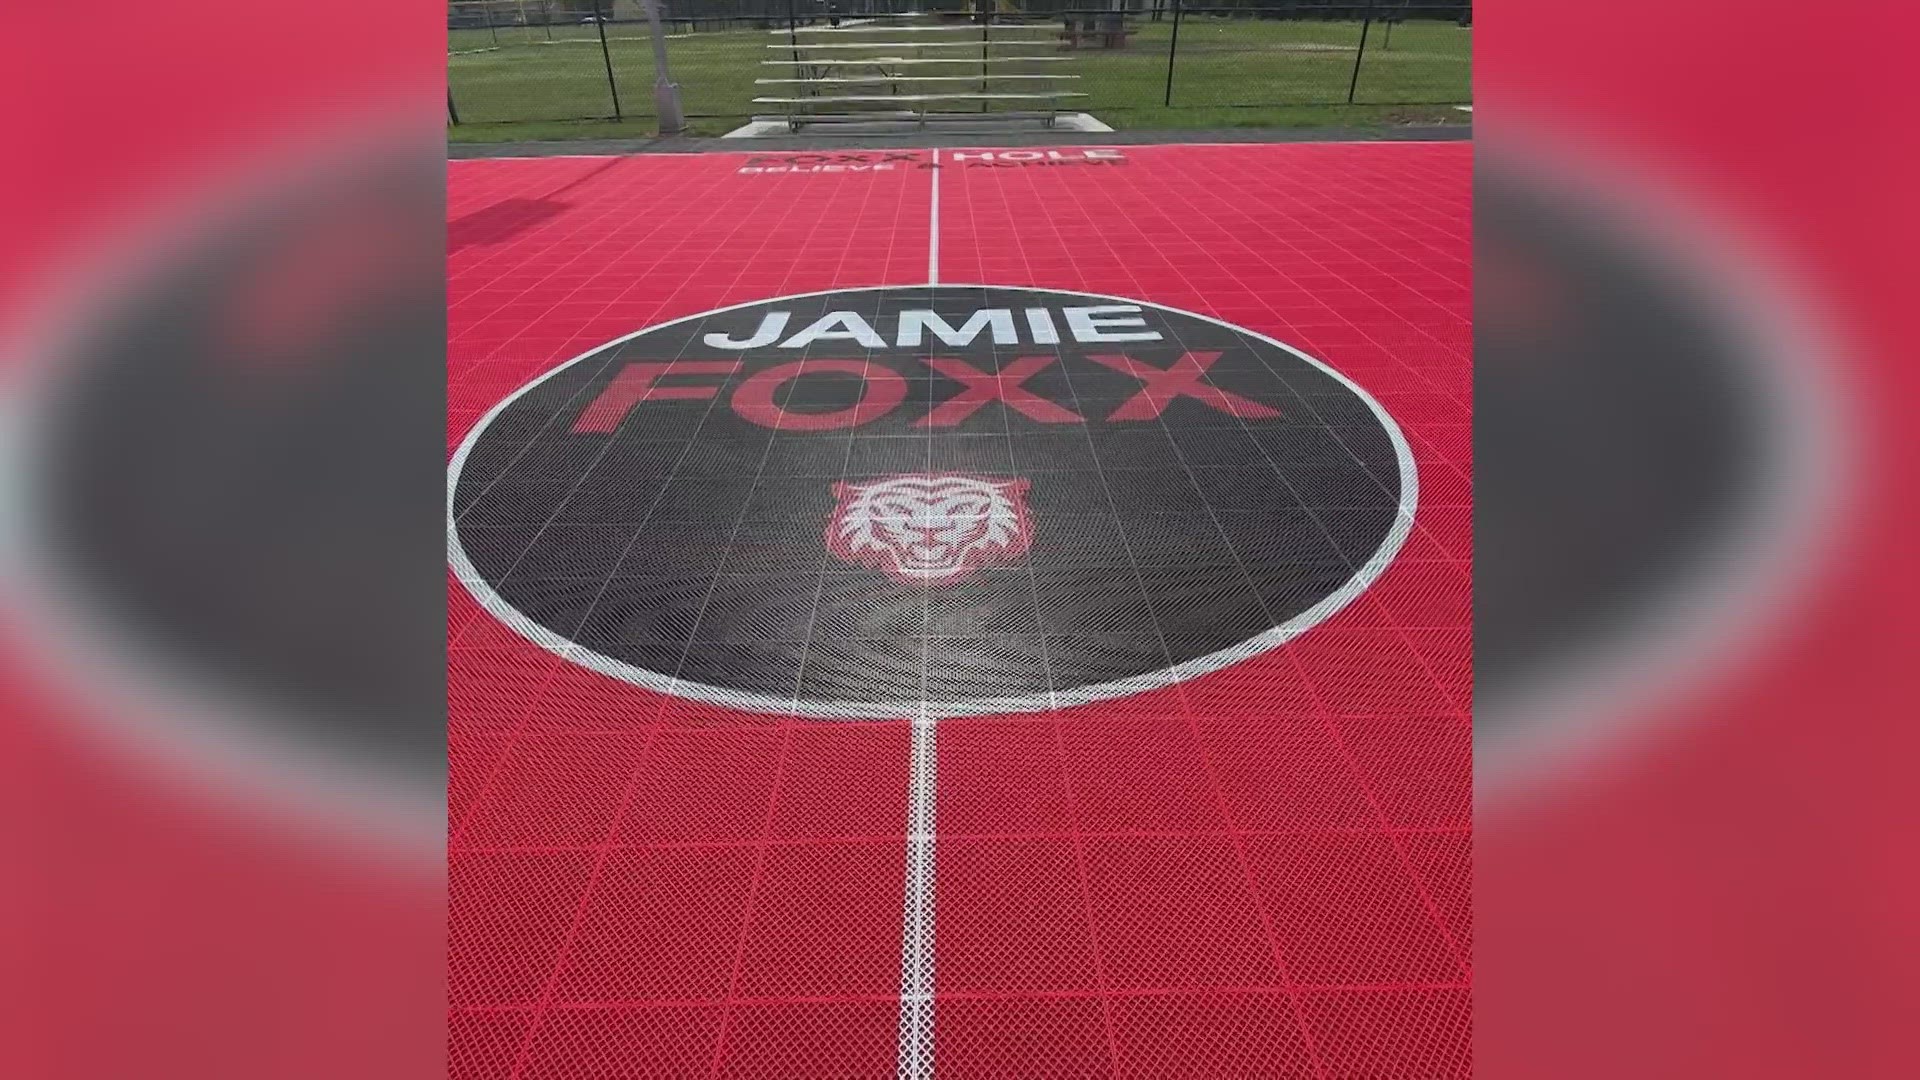 The City of Terrell posted a thank you Monday to Jamie Foxx. The actor's charity donated a basketball court to his hometown.